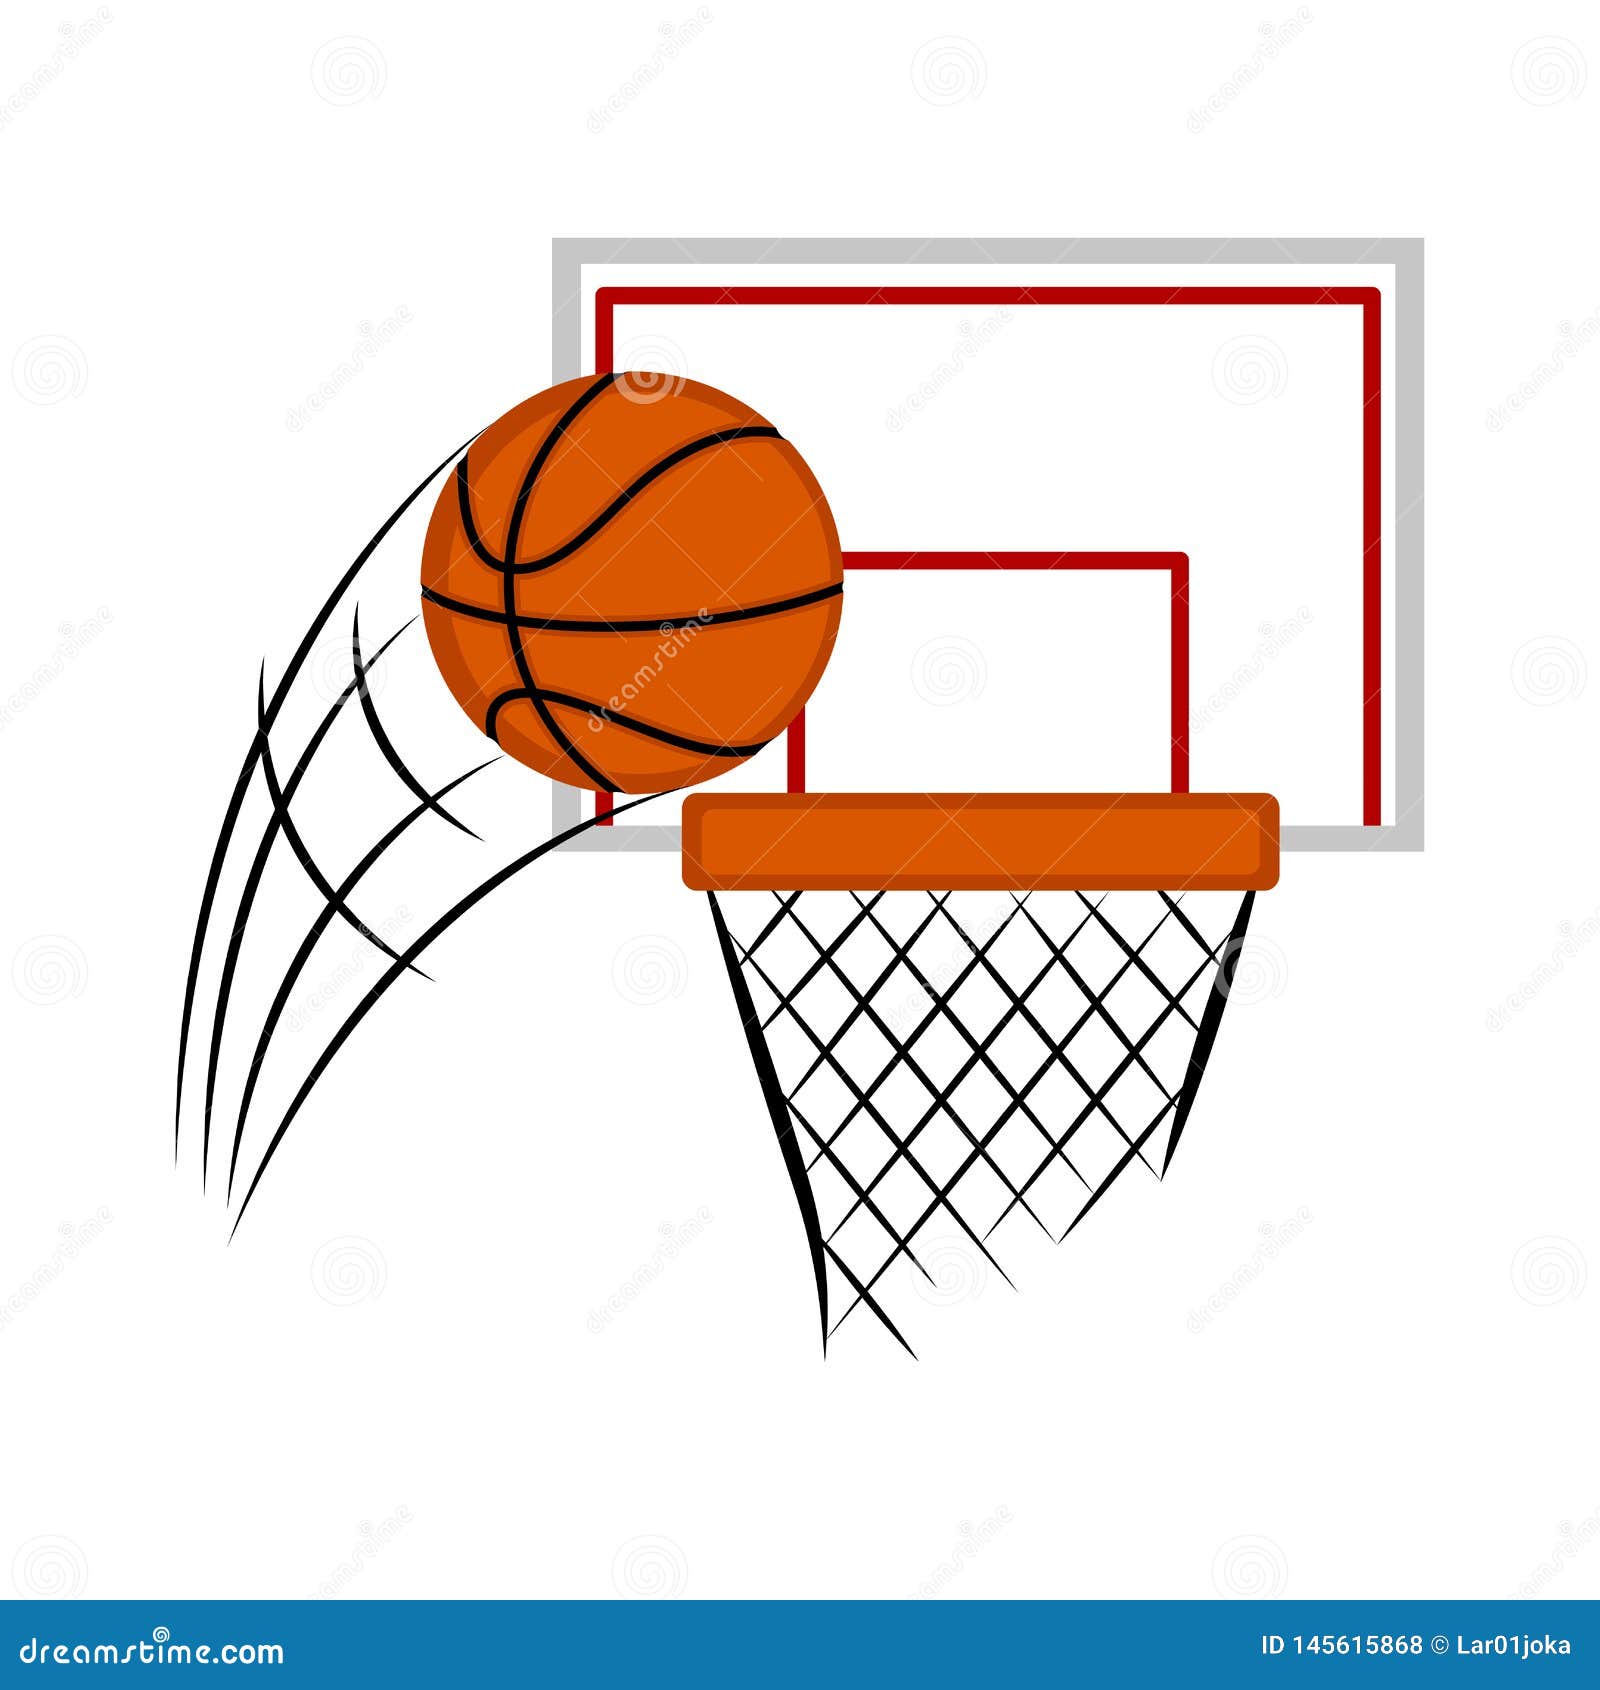 Basketball Hoop and Net with a Ball Stock Vector - Illustration of